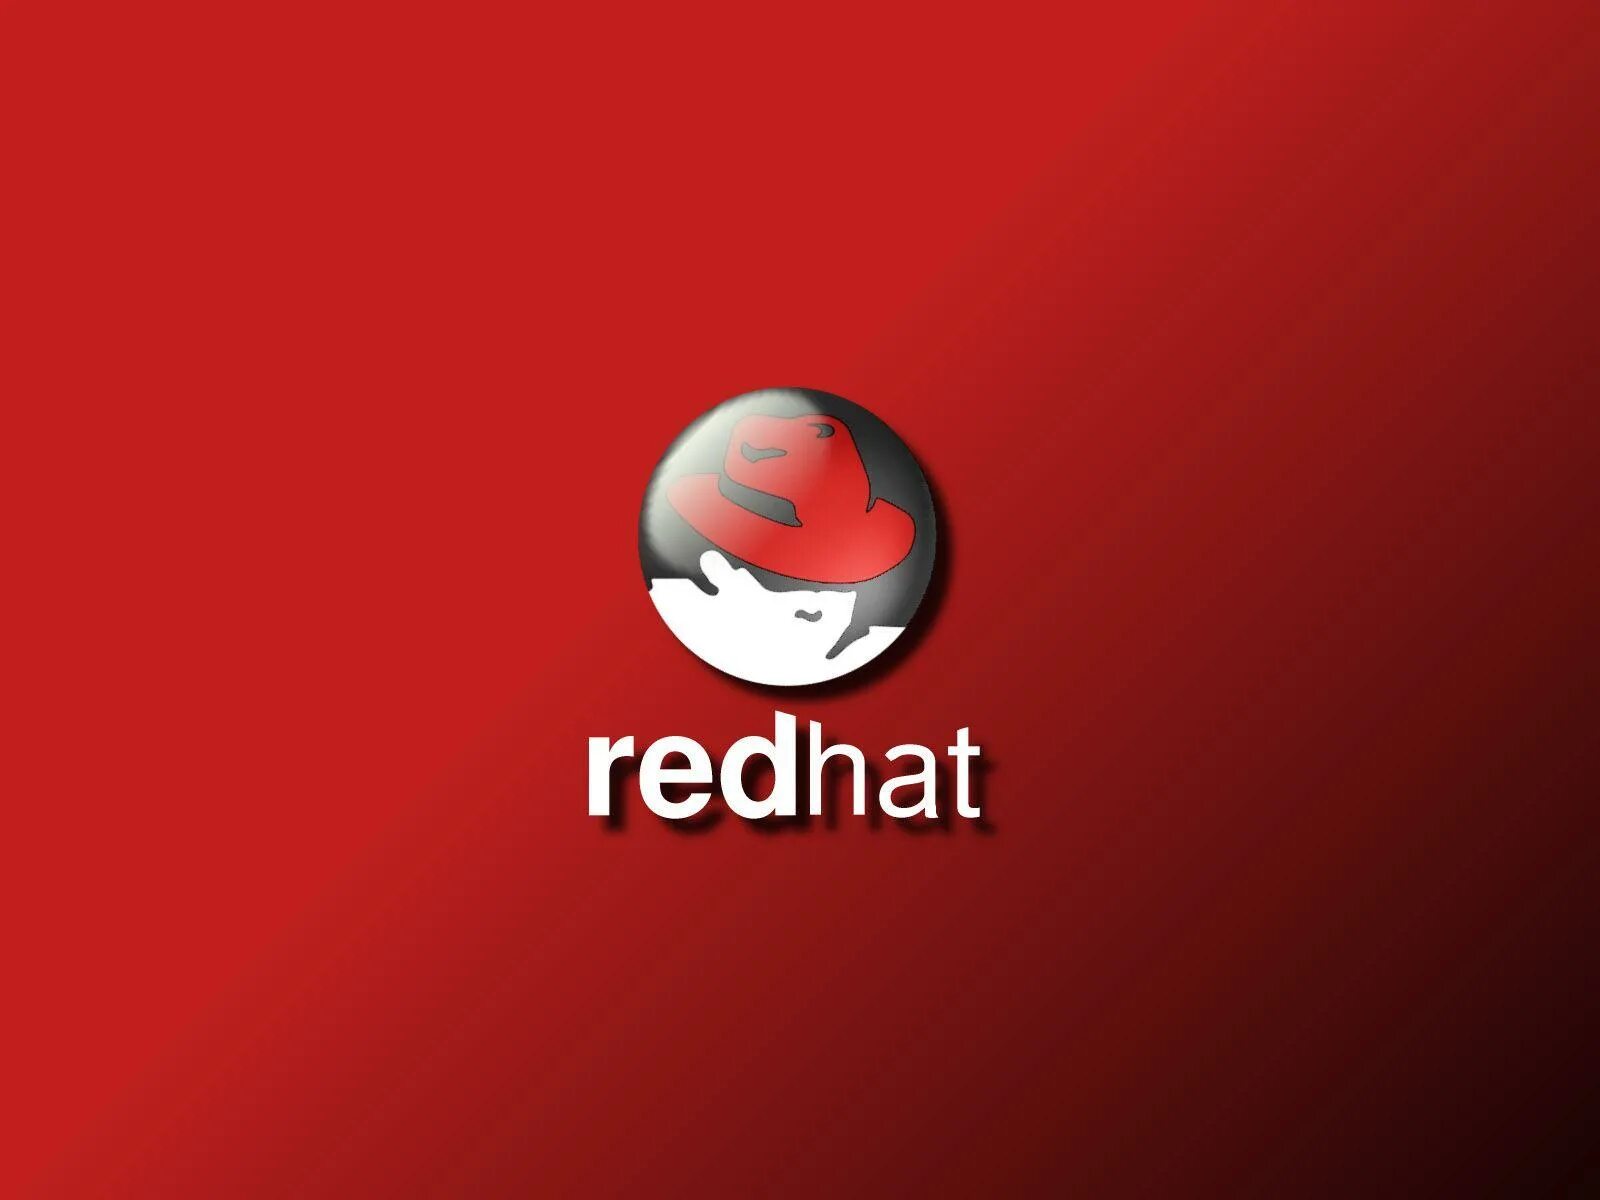 Red hat 8. Линукс Red hat. Red hat Enterprise Linux 7. Red hat Enterprise Linux. Red hat Enterprise Linux логотип.